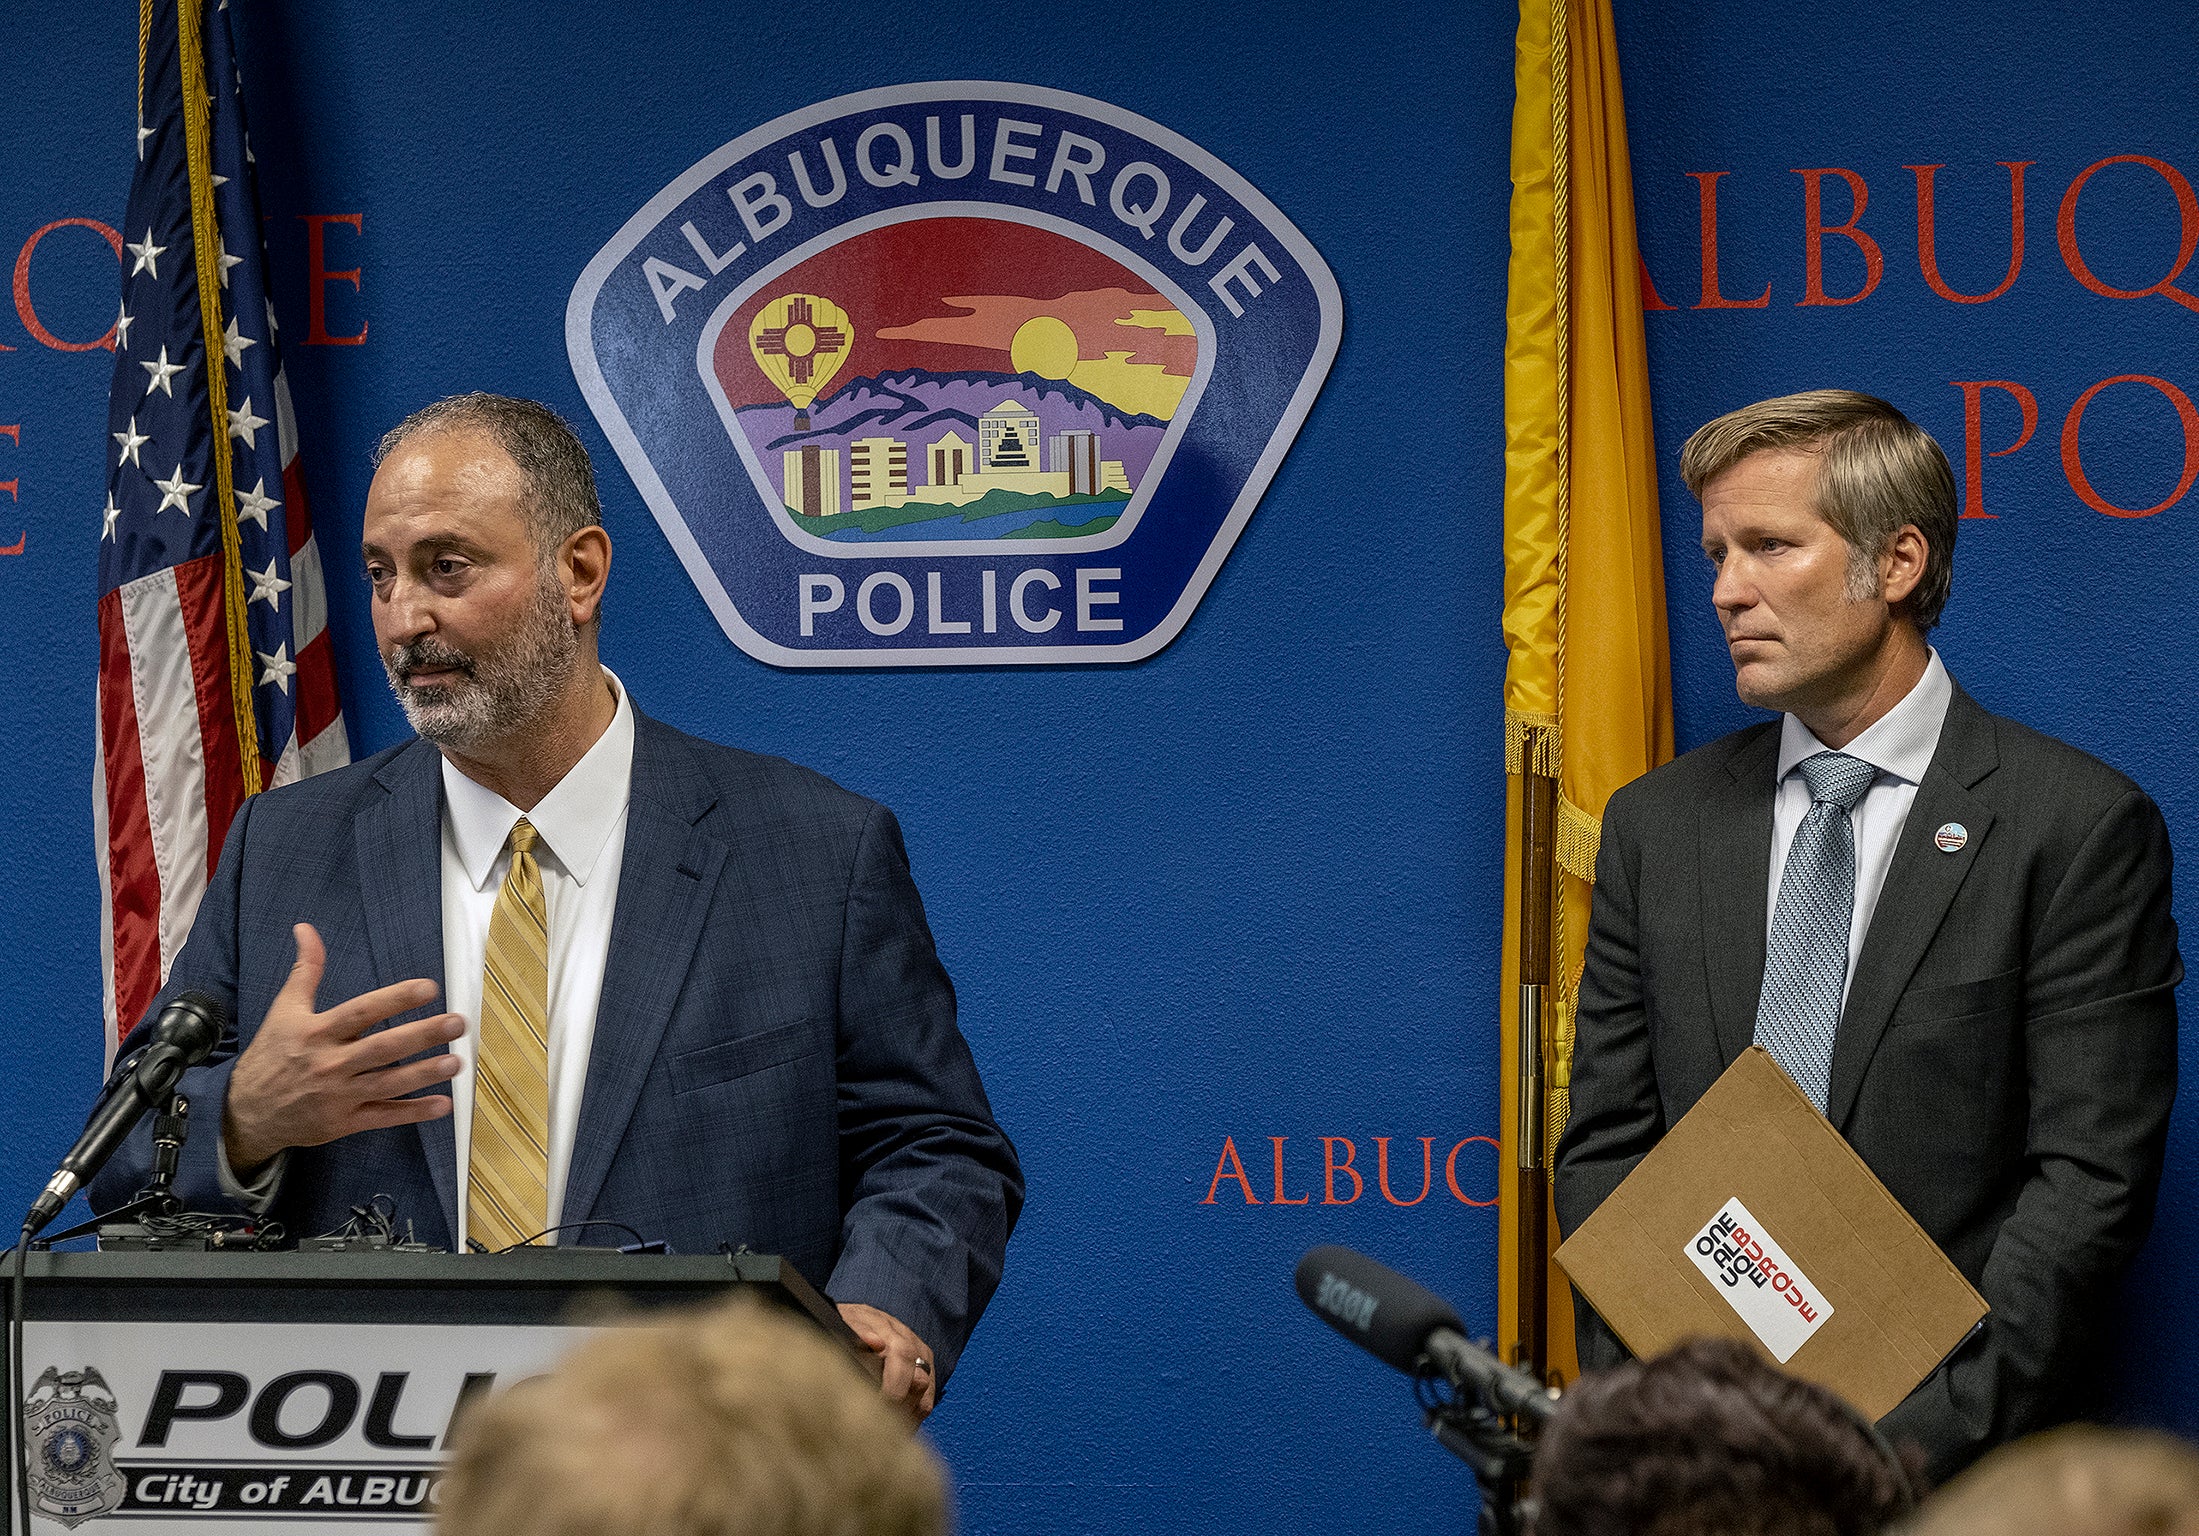 Ahmad Assed, president of the Islamic Center of New Mexico, left, speaks at a news conference to announce the arrest of the alleged perpetrator